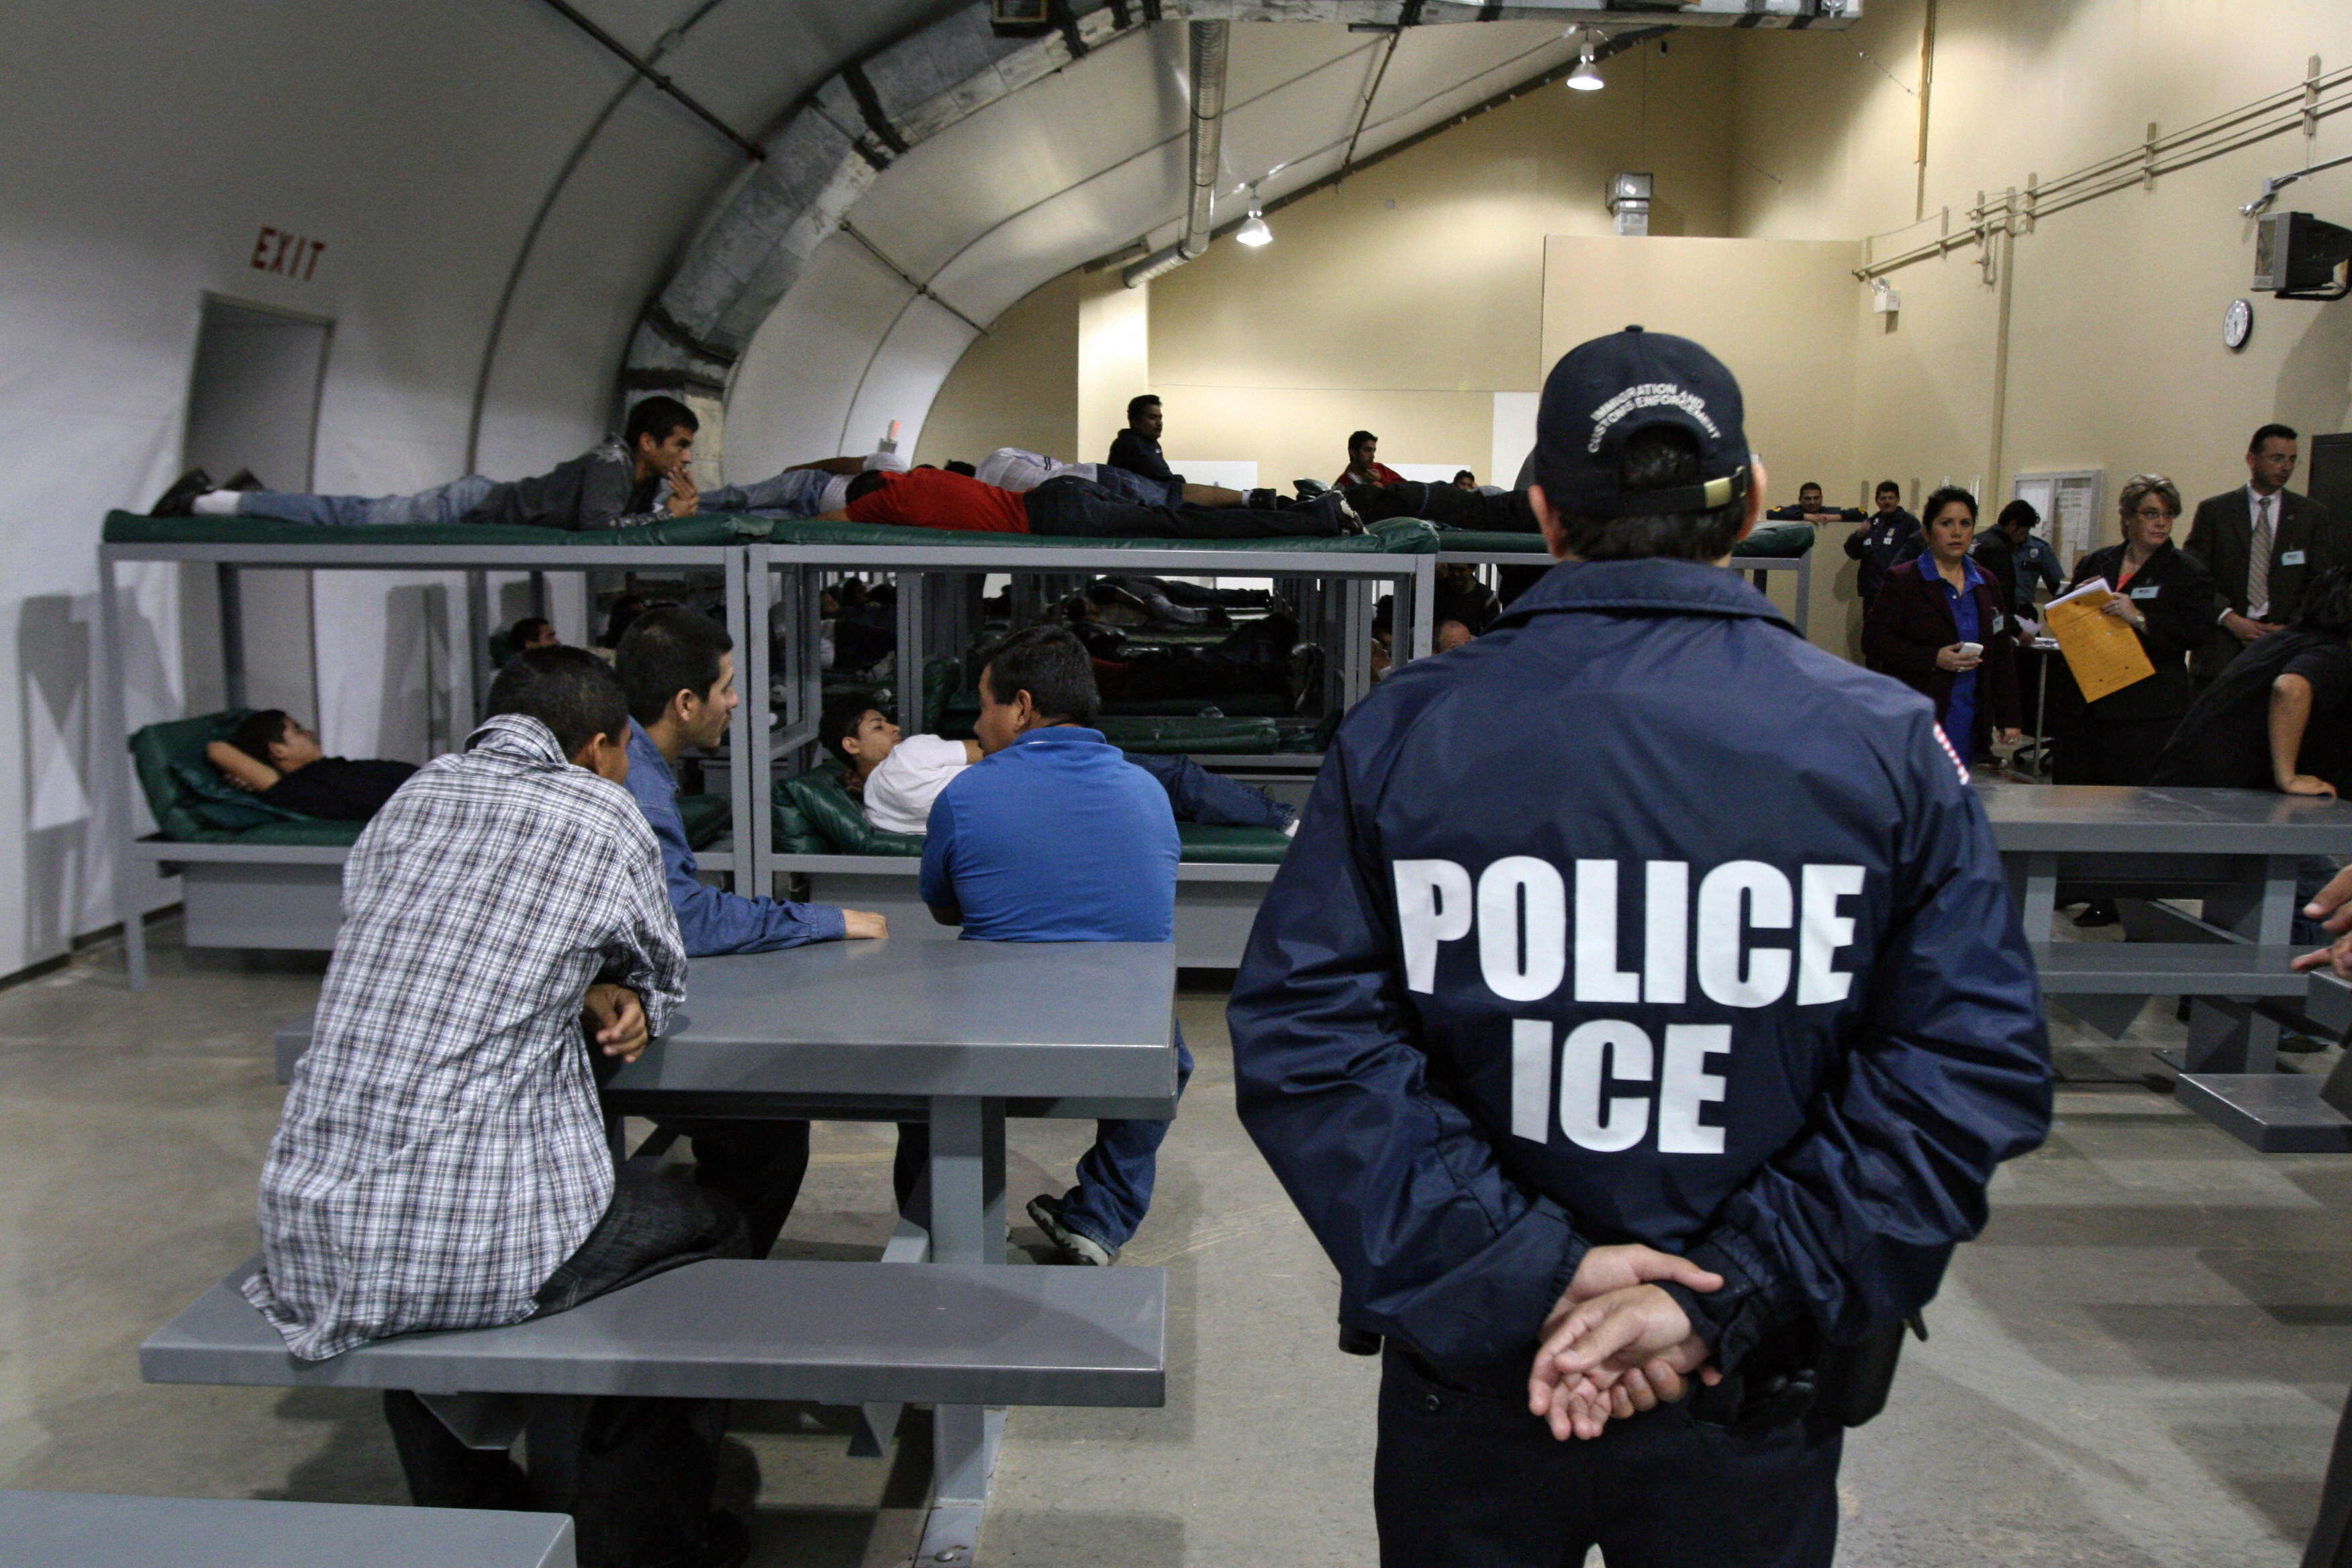 An Immigration and Customs Enforcement (ICE) officer guards a group of immigrations at a facility in Raymondsville, Texas, in 2008. (JOSE CABEZAS—AFP/Getty Images)